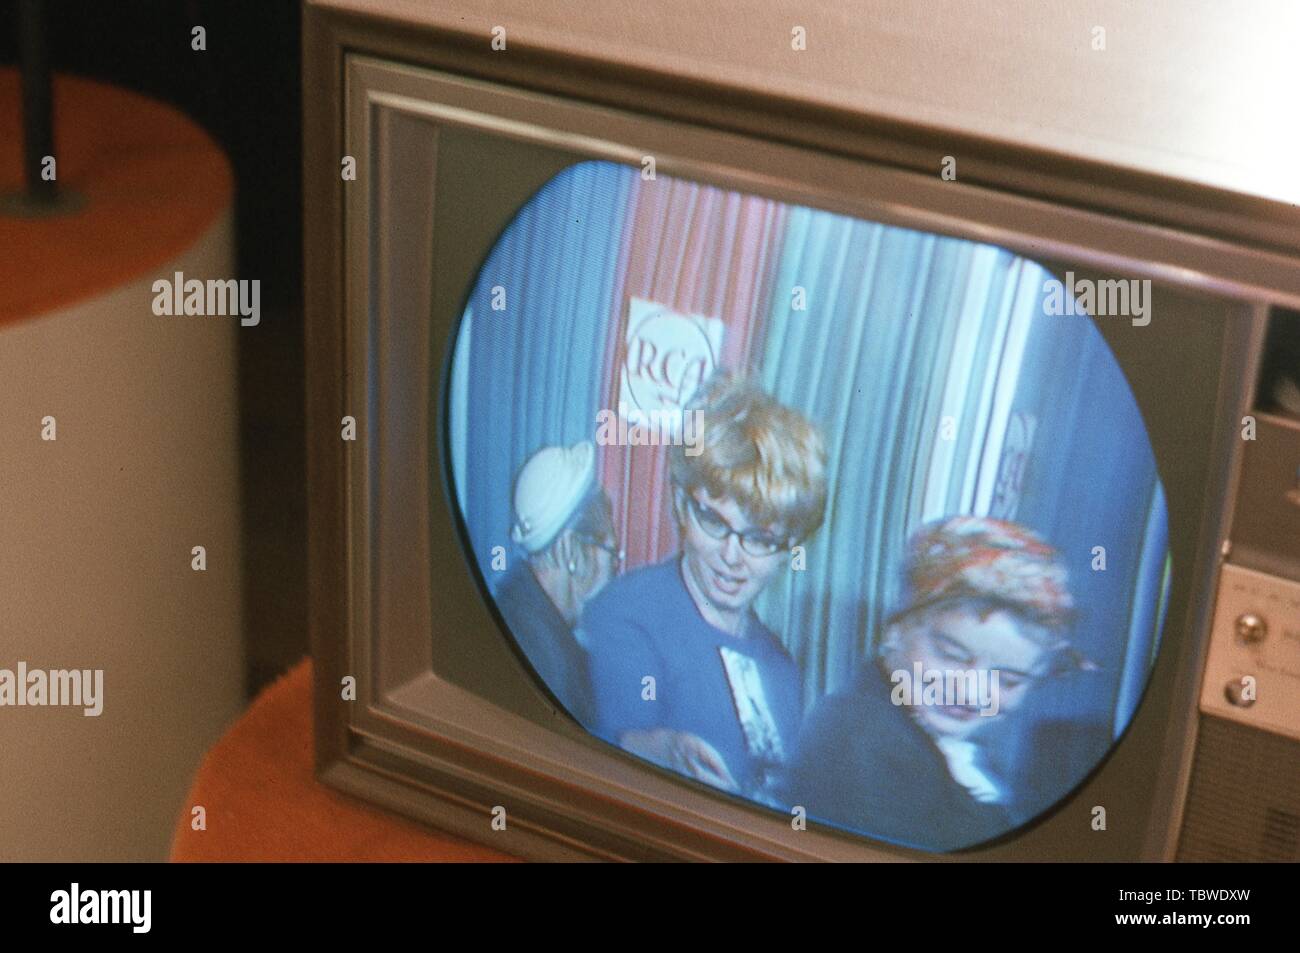 Visitors see themselves broadcast in color for the first time from monitor sets lining the entrance to the Color Television Communications Center exhibit at the RCA Pavilion of the New York World's Fair, Flushing Meadows, Queens, New York, August, 1965. () Stock Photo